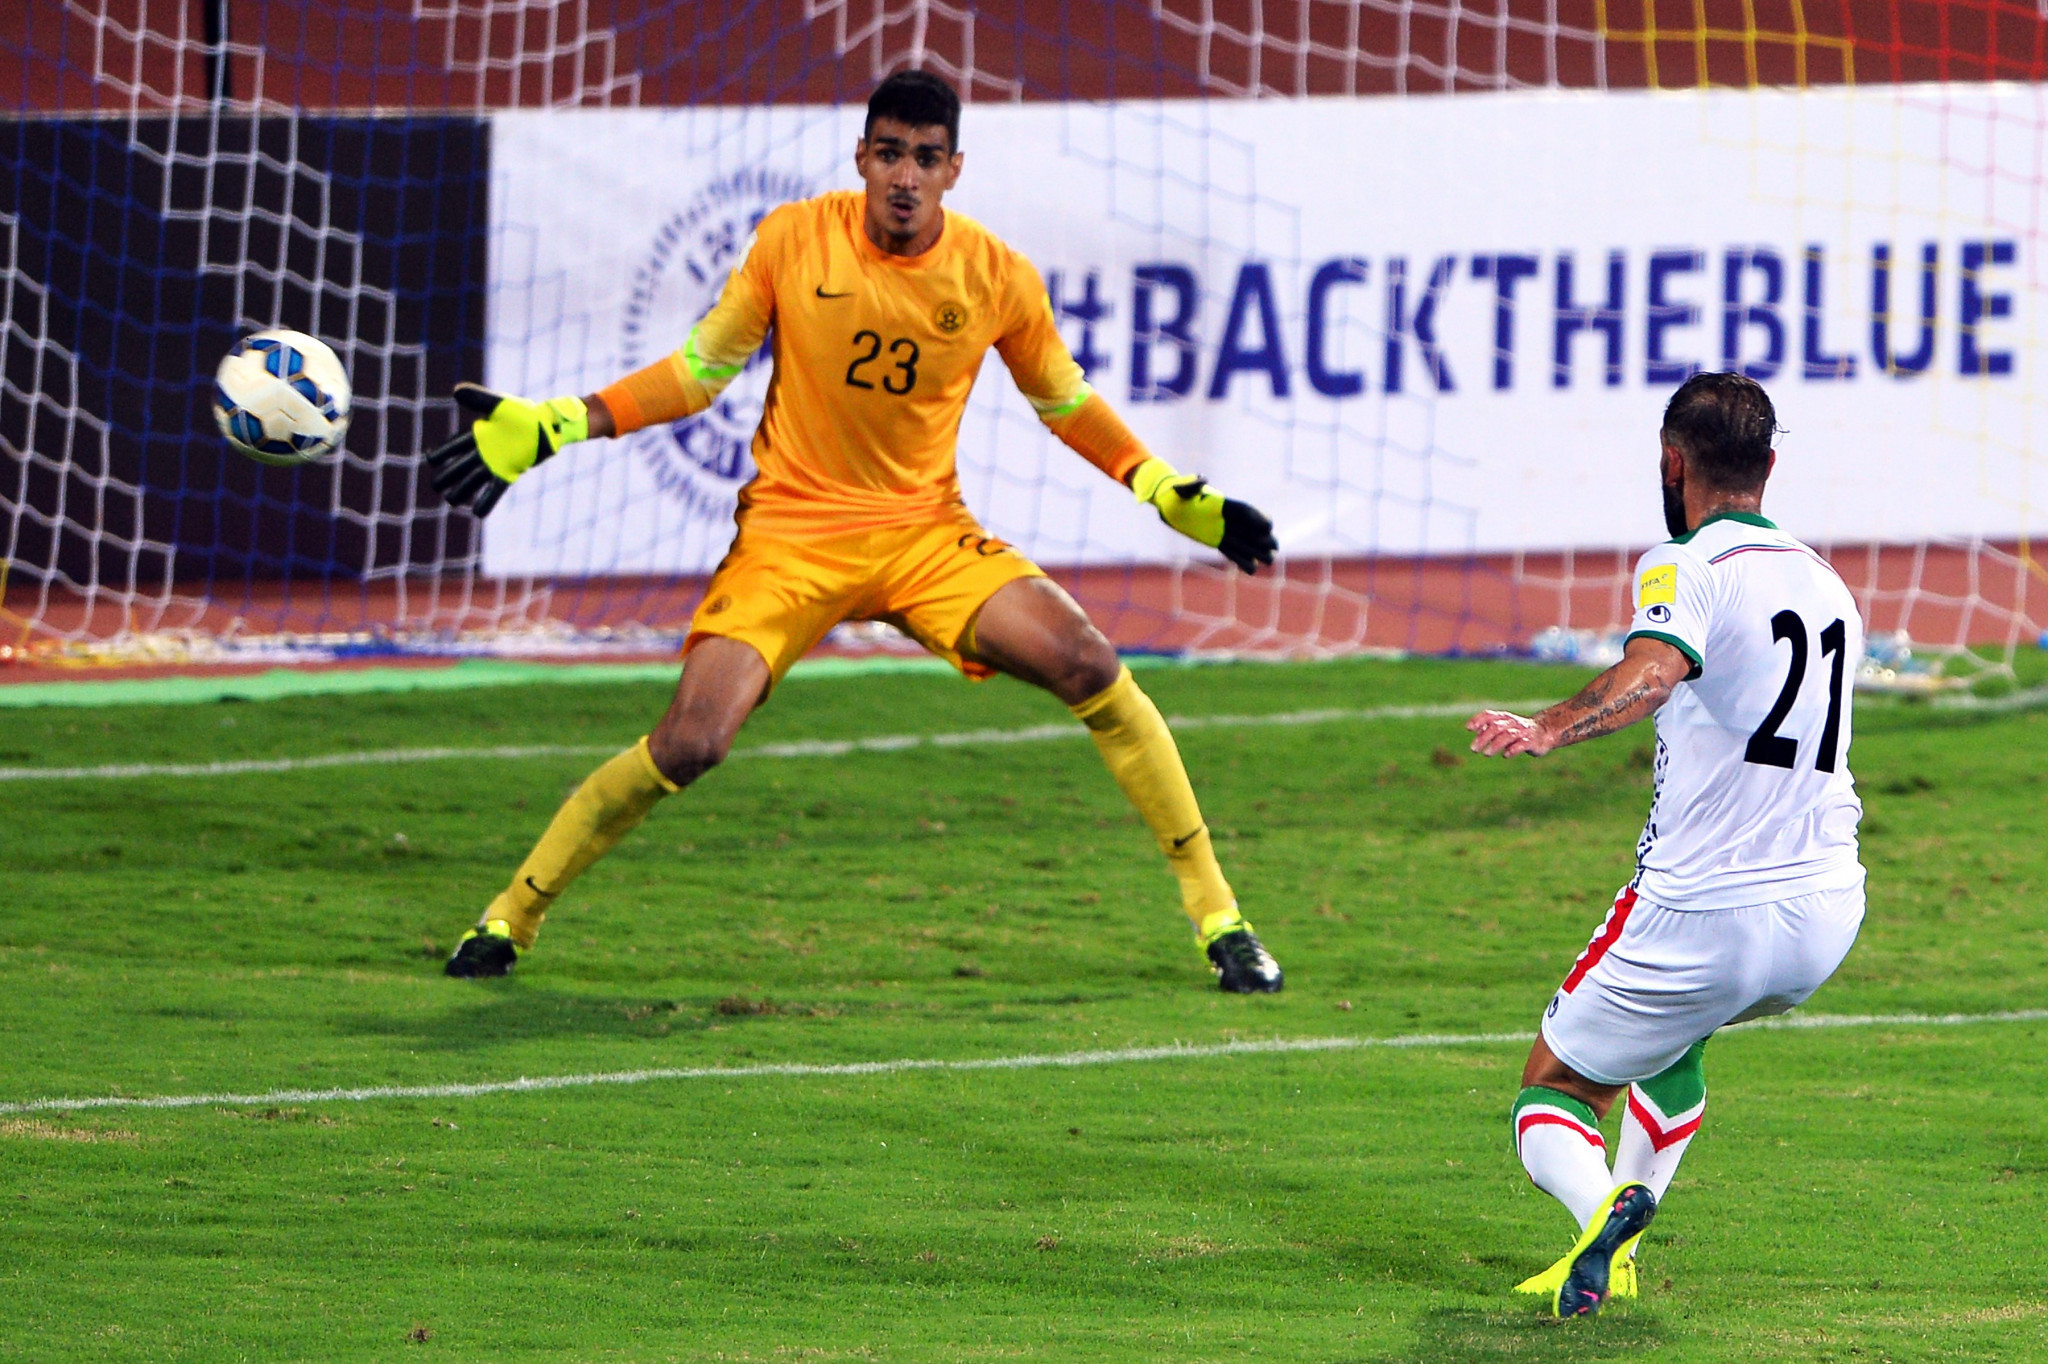 Indian goalkeeper Gurpreet Singh will help headline the Stay Active campaign ©Getty Images